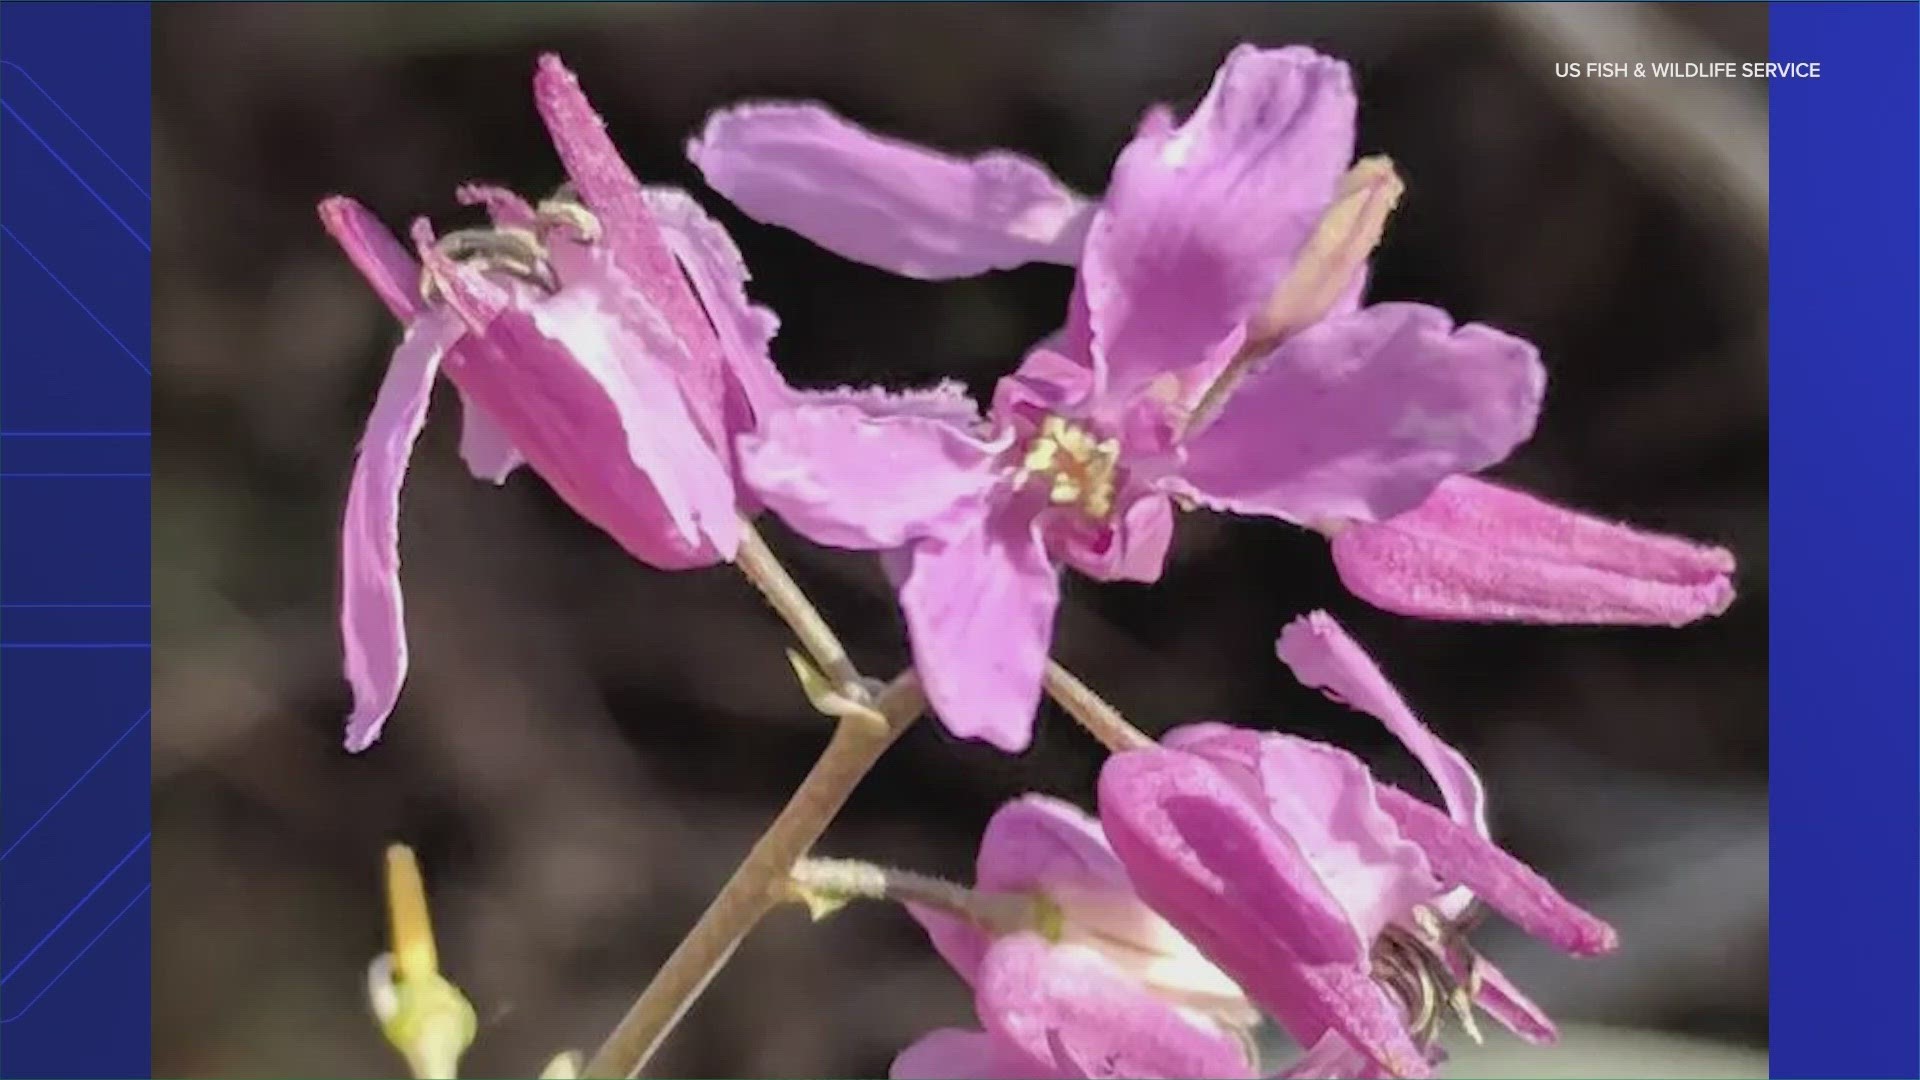 A rare Texas wildflower – the bracted twistflower – is now protected as a threatened species.